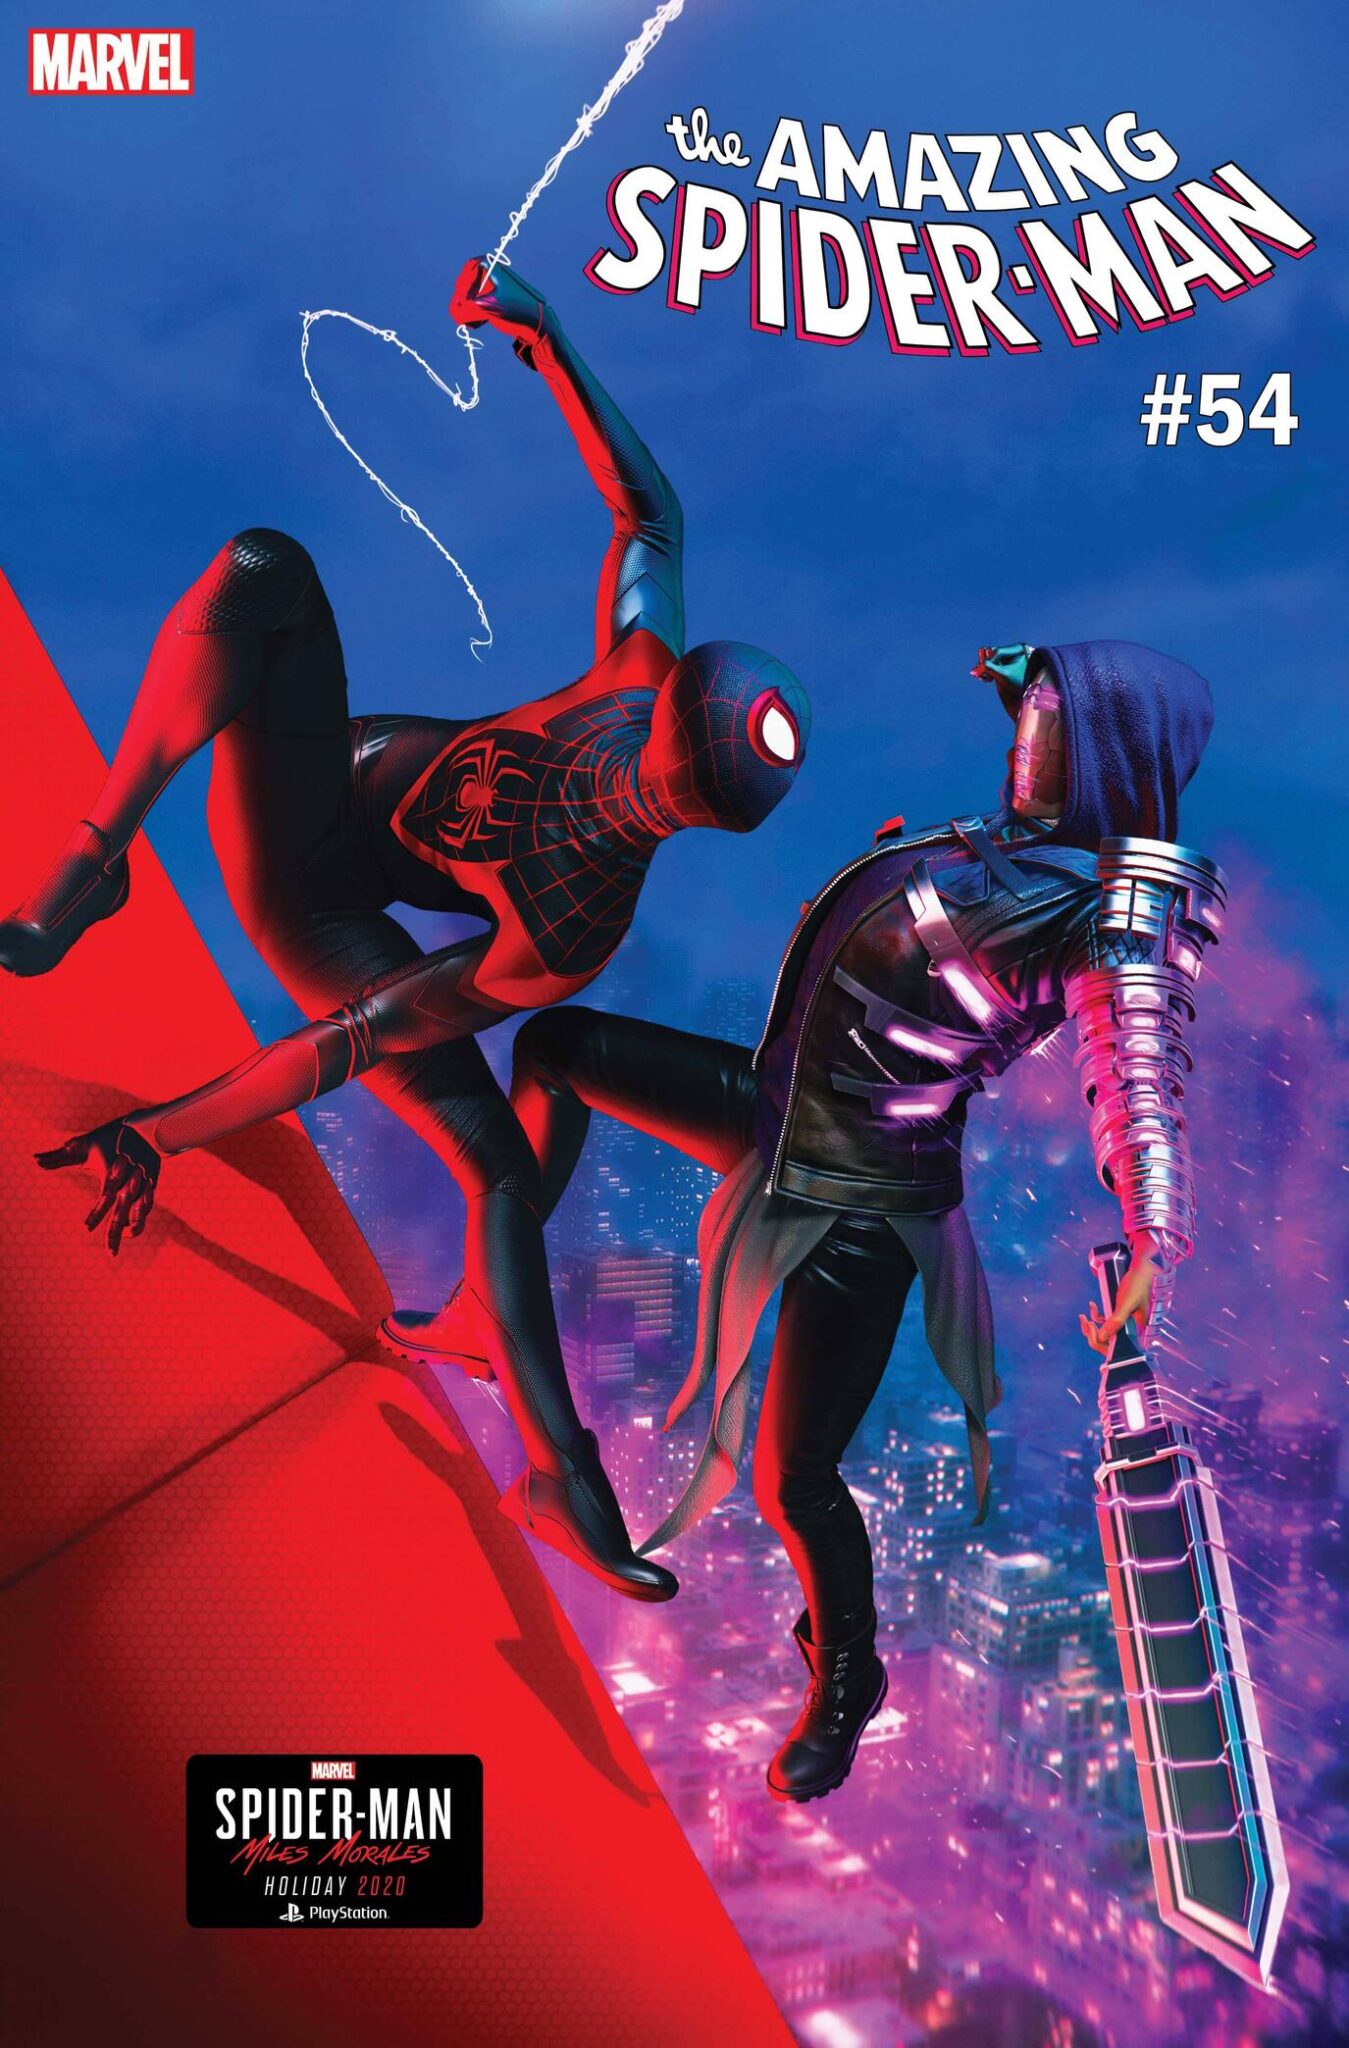 New ‘SpiderMan Miles Morales’ Variant Covers Coming This November